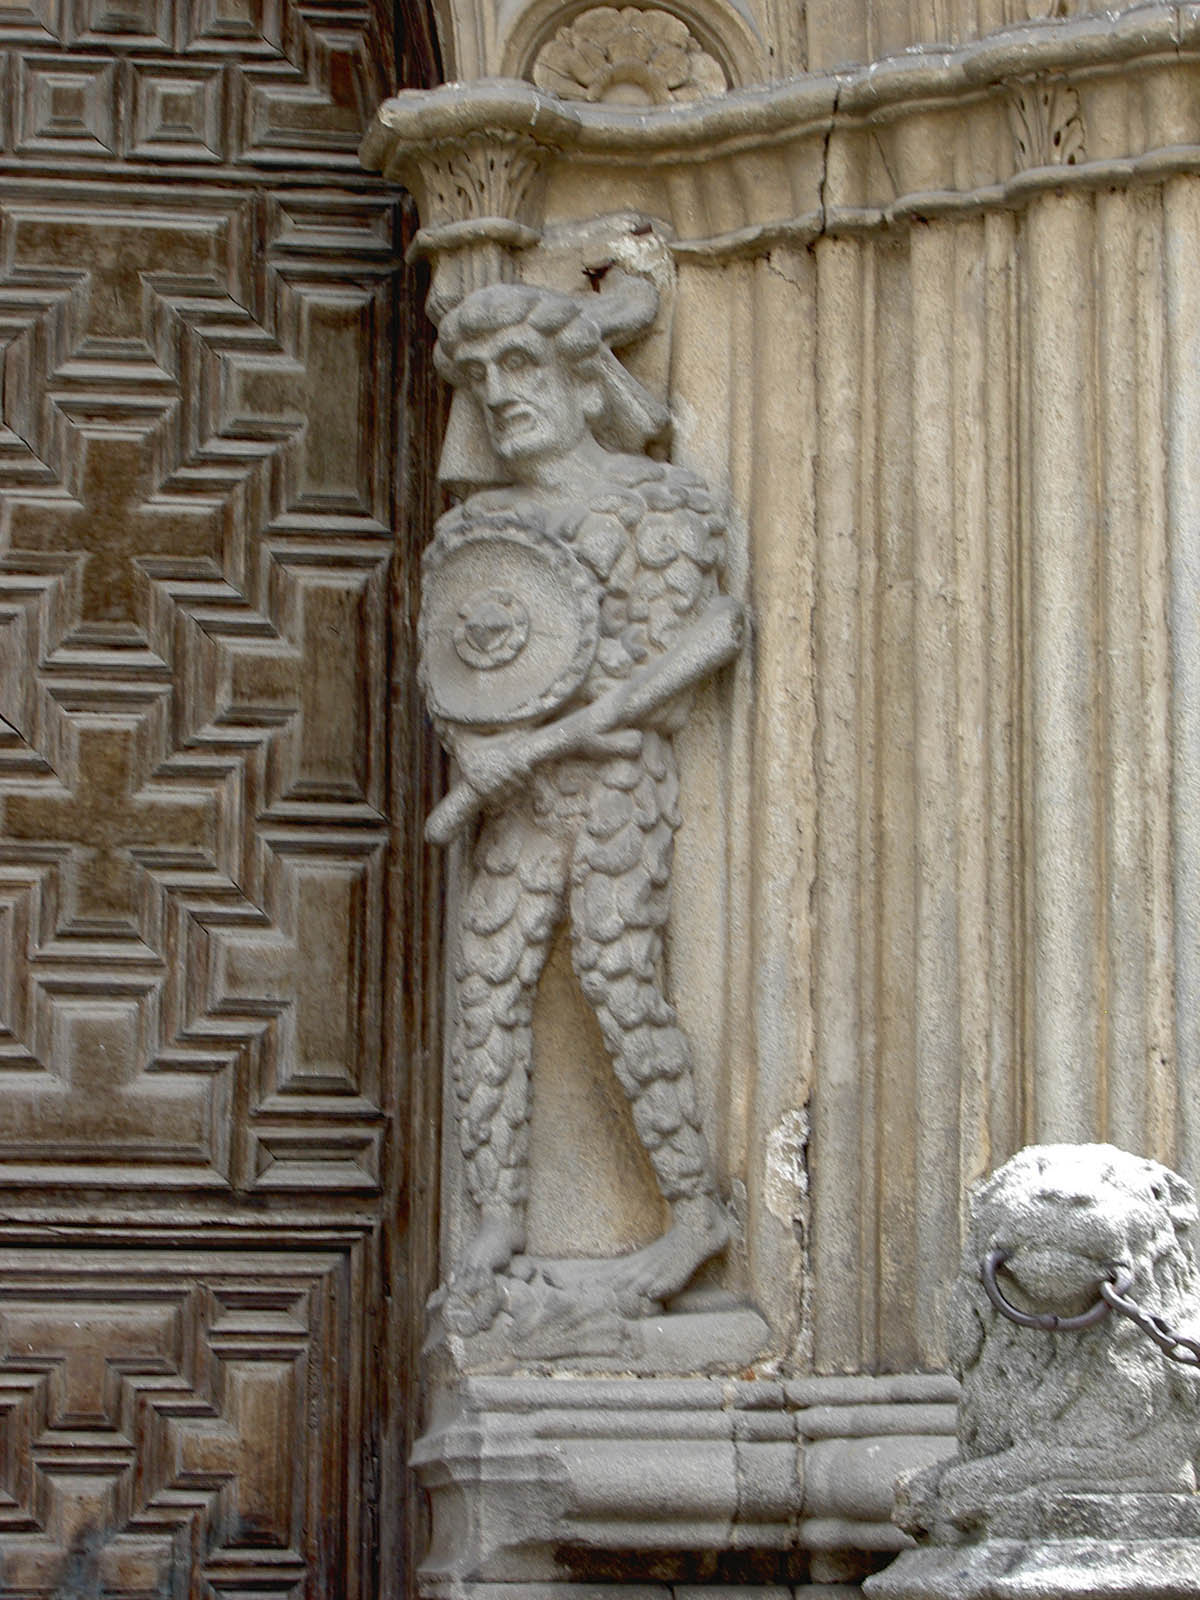 a statue of a man holding an instrument with a lion head on the side